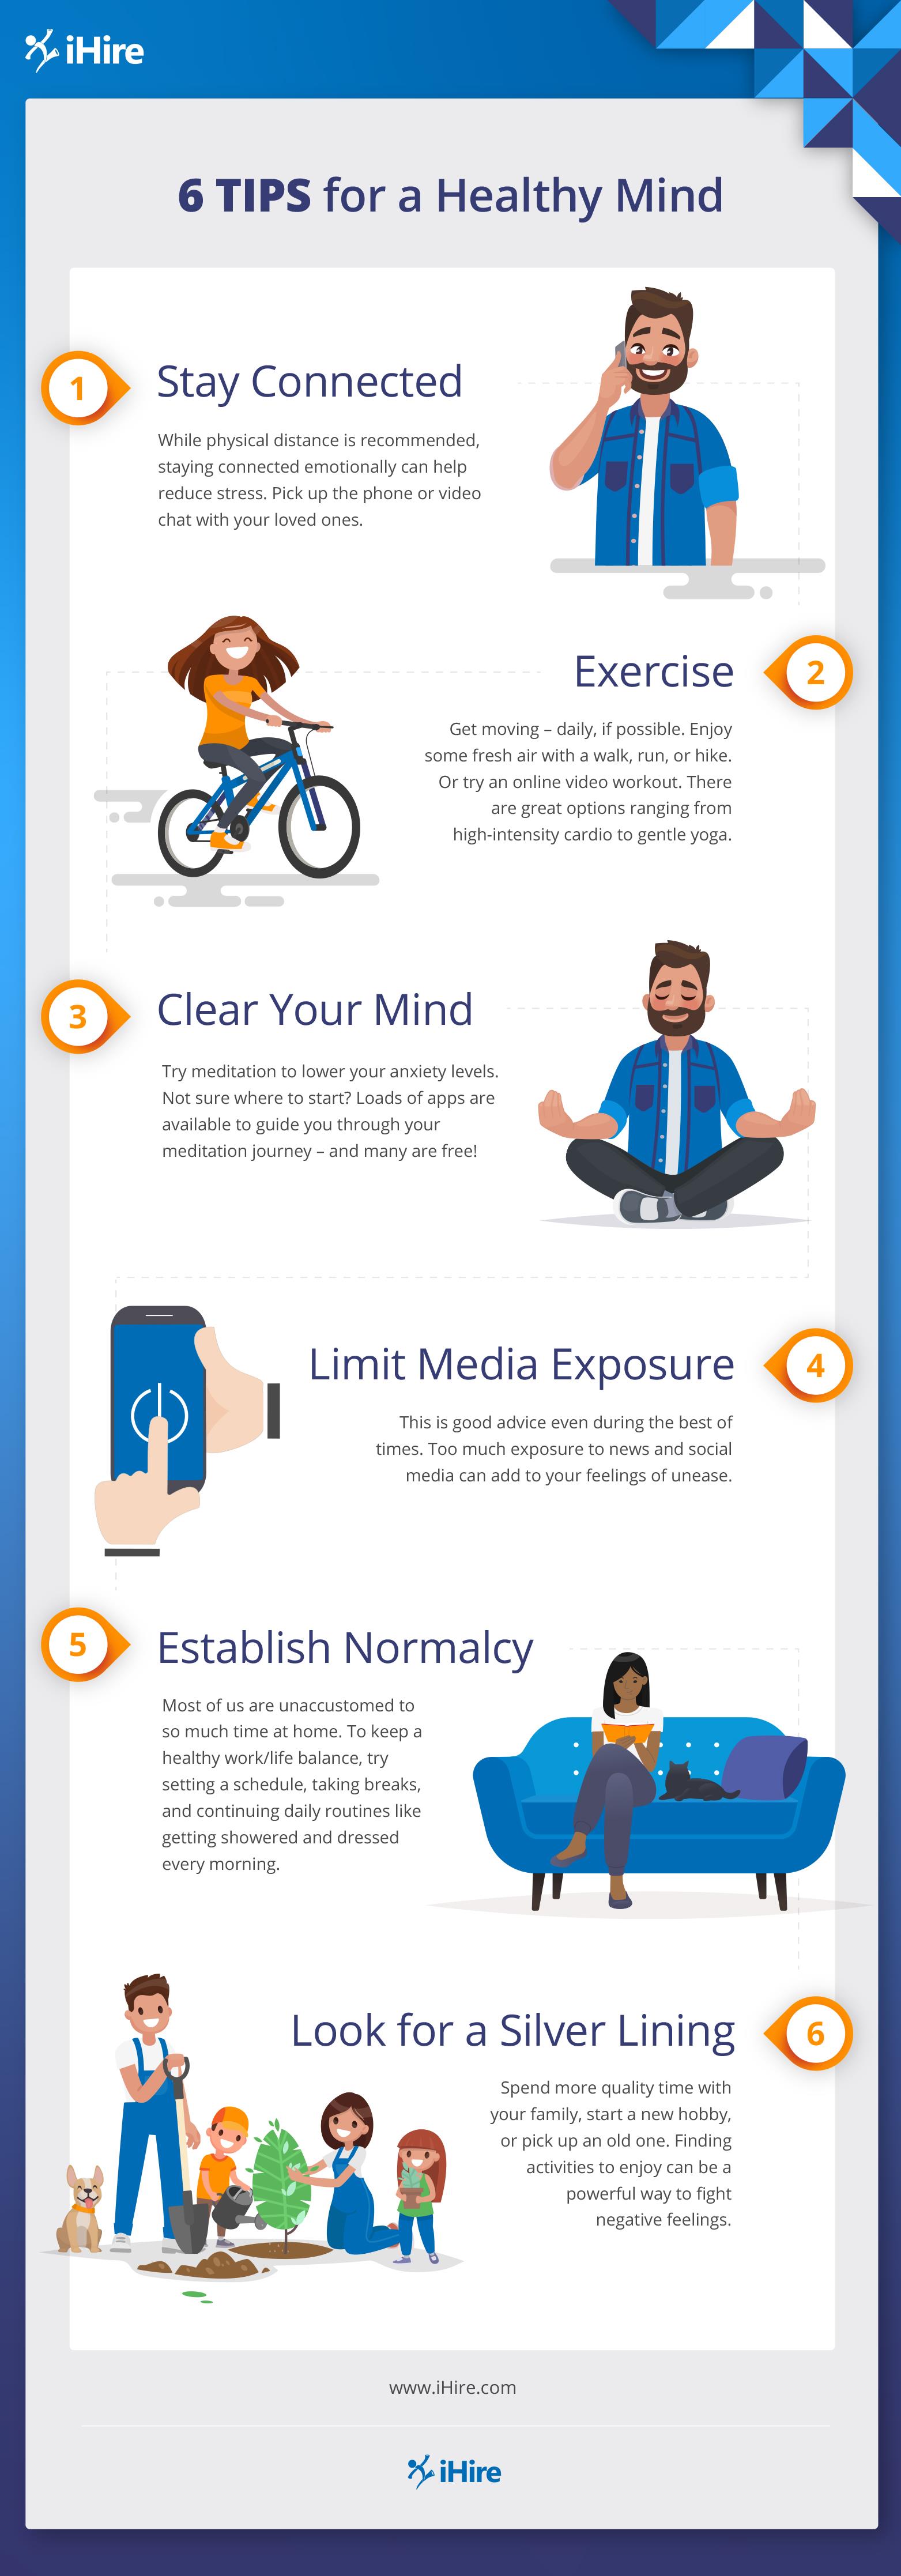 Mental Health Tips - Mental Health Infographic | iHire